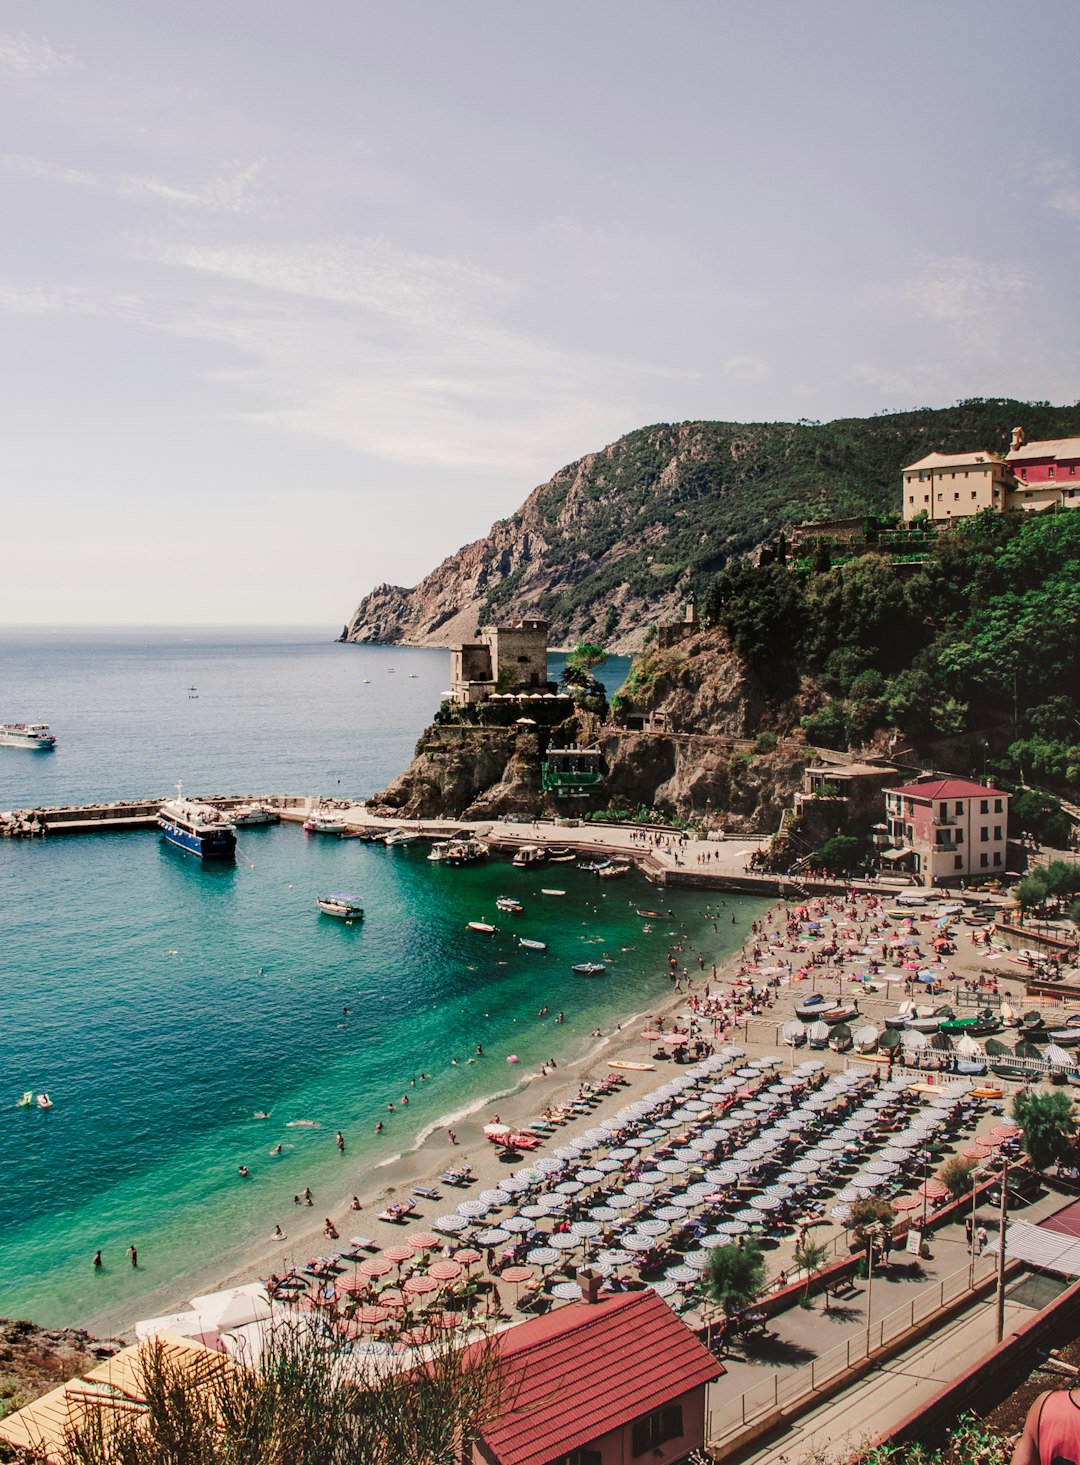 Travel Tips and Stories of Monterosso al Mare in Italy